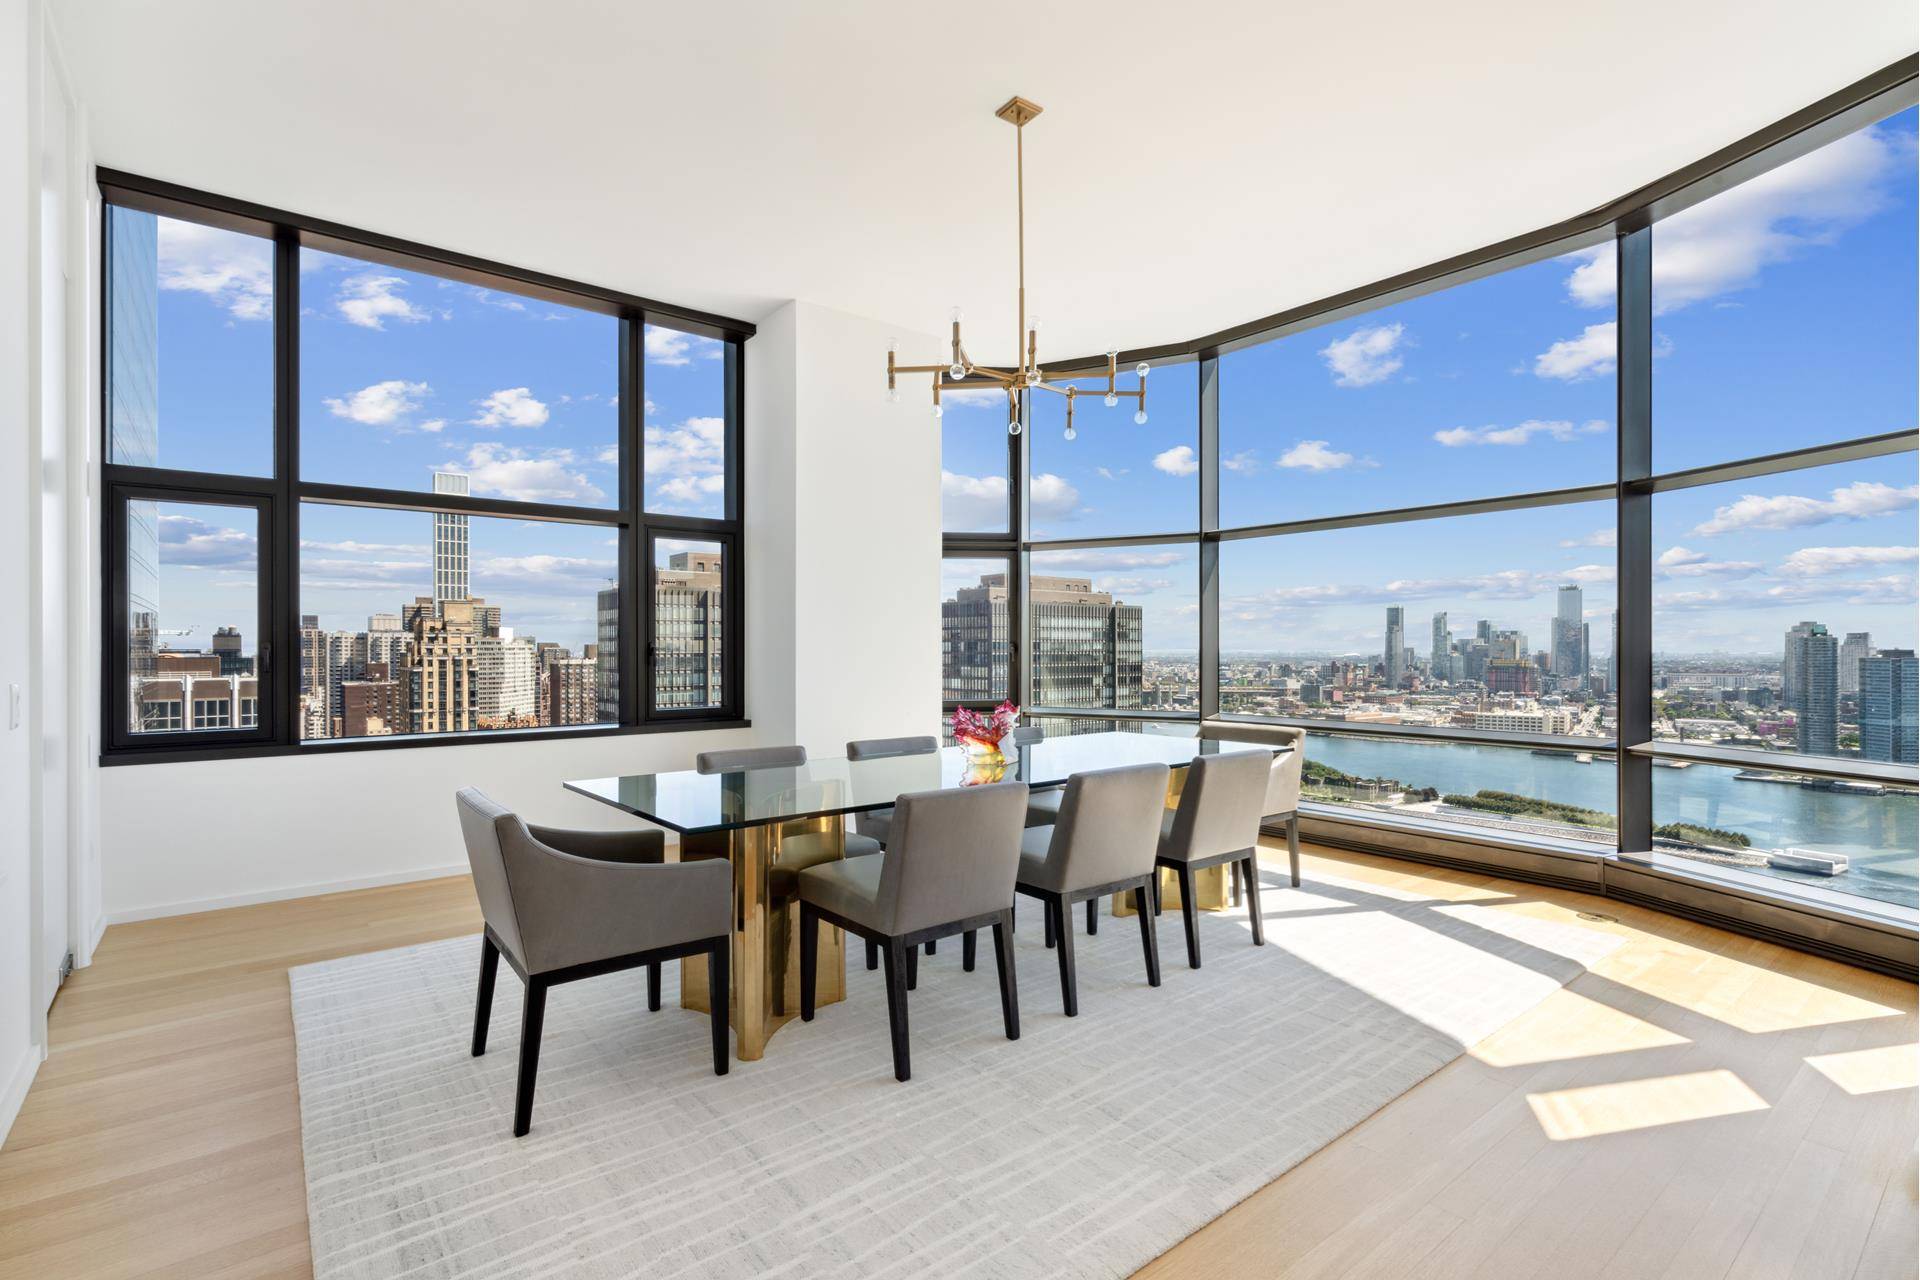 Spanning over 3, 000 square feet with spectacular views, 31B is a corner 3 bedroom 3.